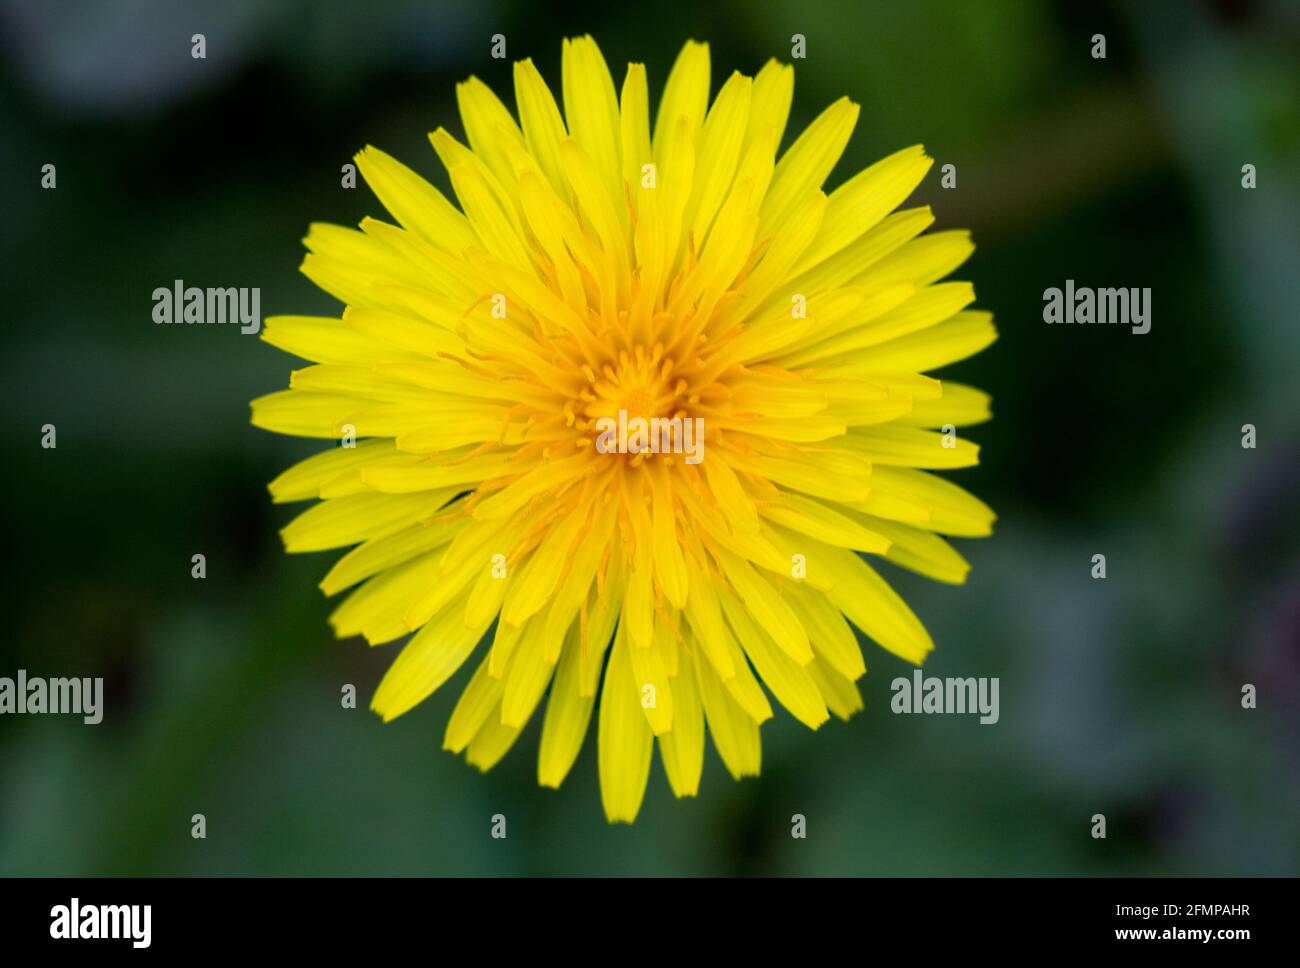 Top view of the composite flower head of a Dandelionandelion Stock Photo